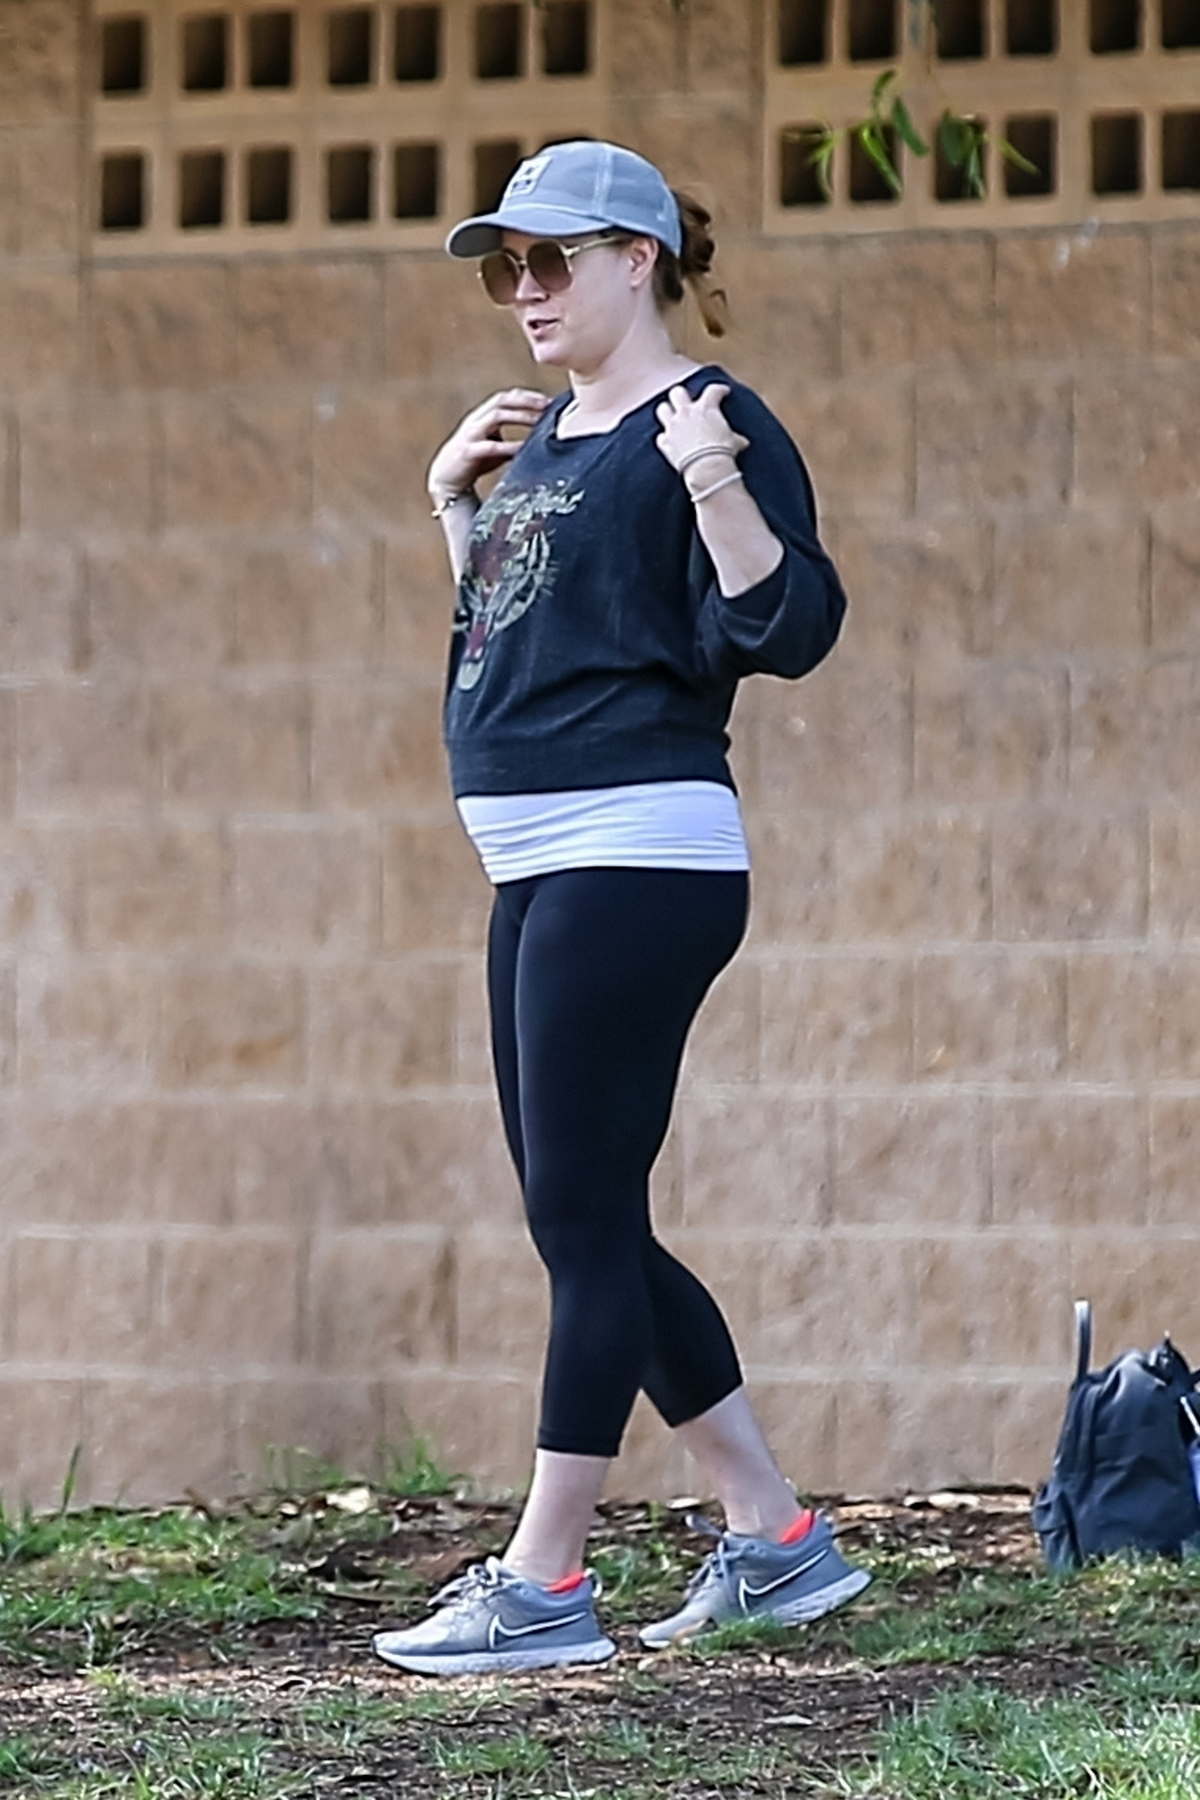 https://www.celebsfirst.com/wp-content/uploads/2022/09/amy-adams-keeps-it-casual-in-a-black-top-and-leggings-while-at-her-daughters-soccer-practice-in-culver-city-california-190922_7.jpg